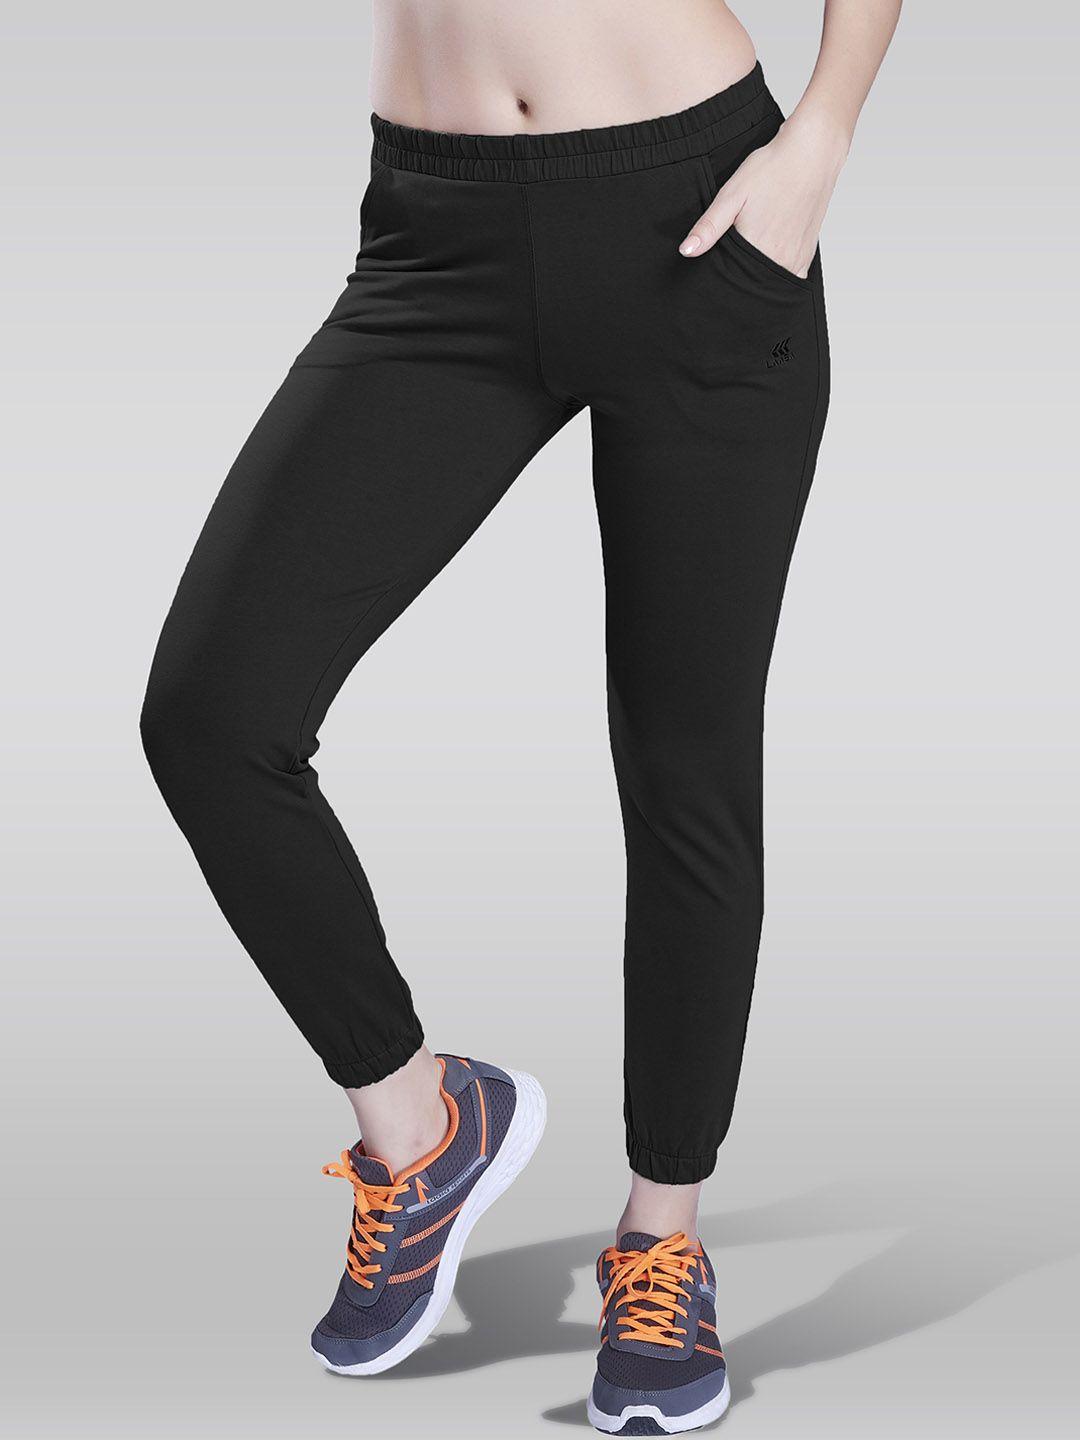 laasa--sports-cotton-dry-fit-tights